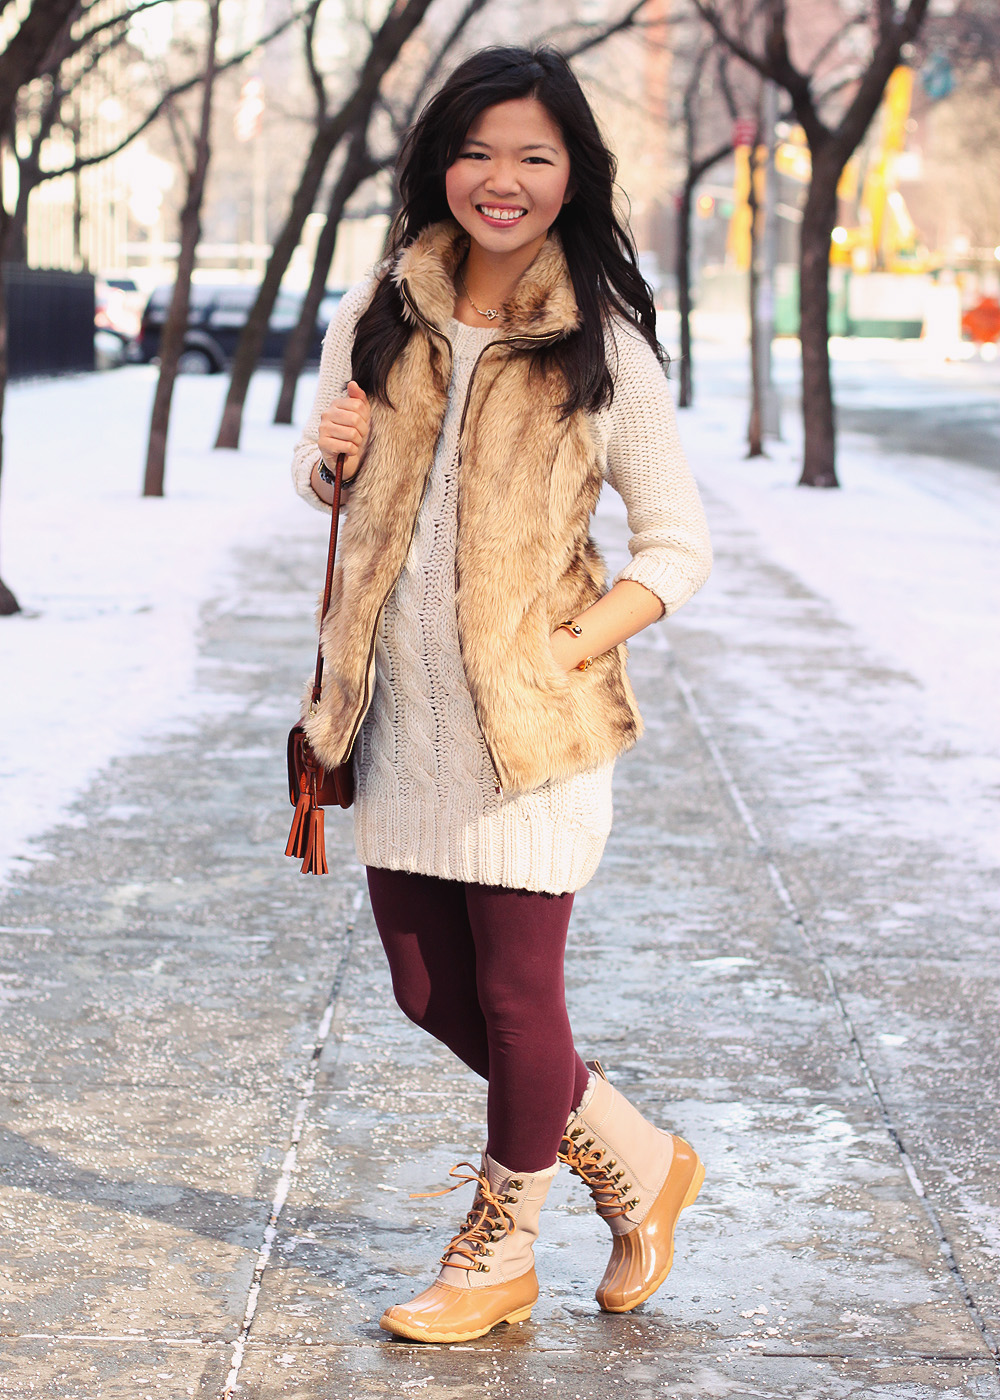 Jenny in Jacquard; NYC fashion blogger; style blog; outfit photo; winter outfit; Zara cream sweater knit dress; Zara Girl faux fur vest; Forever 21 maroon oxblood leggings; Sperry Top-Sider x J.Crew Shearwater snow boots; Coach Legacy Penny crossbody bag in cognac; Michael Kors tortoise gold boyfriend watch; Sequin heart necklace